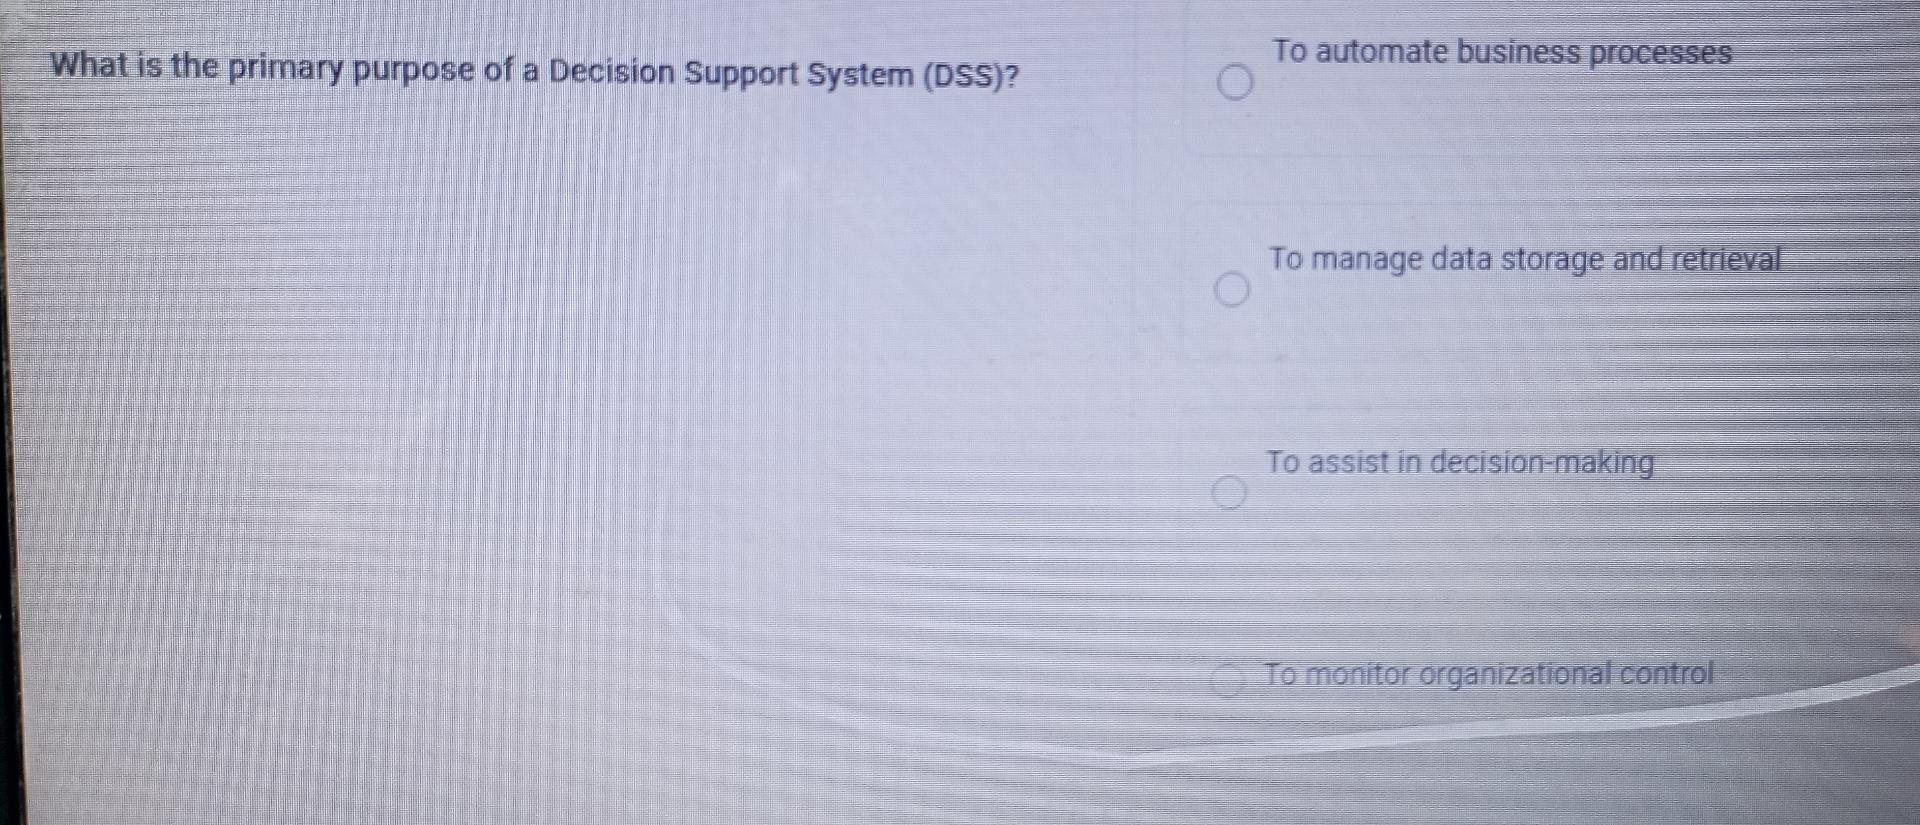 Decision Support System (DSS): What It Is and How Businesses Use Them